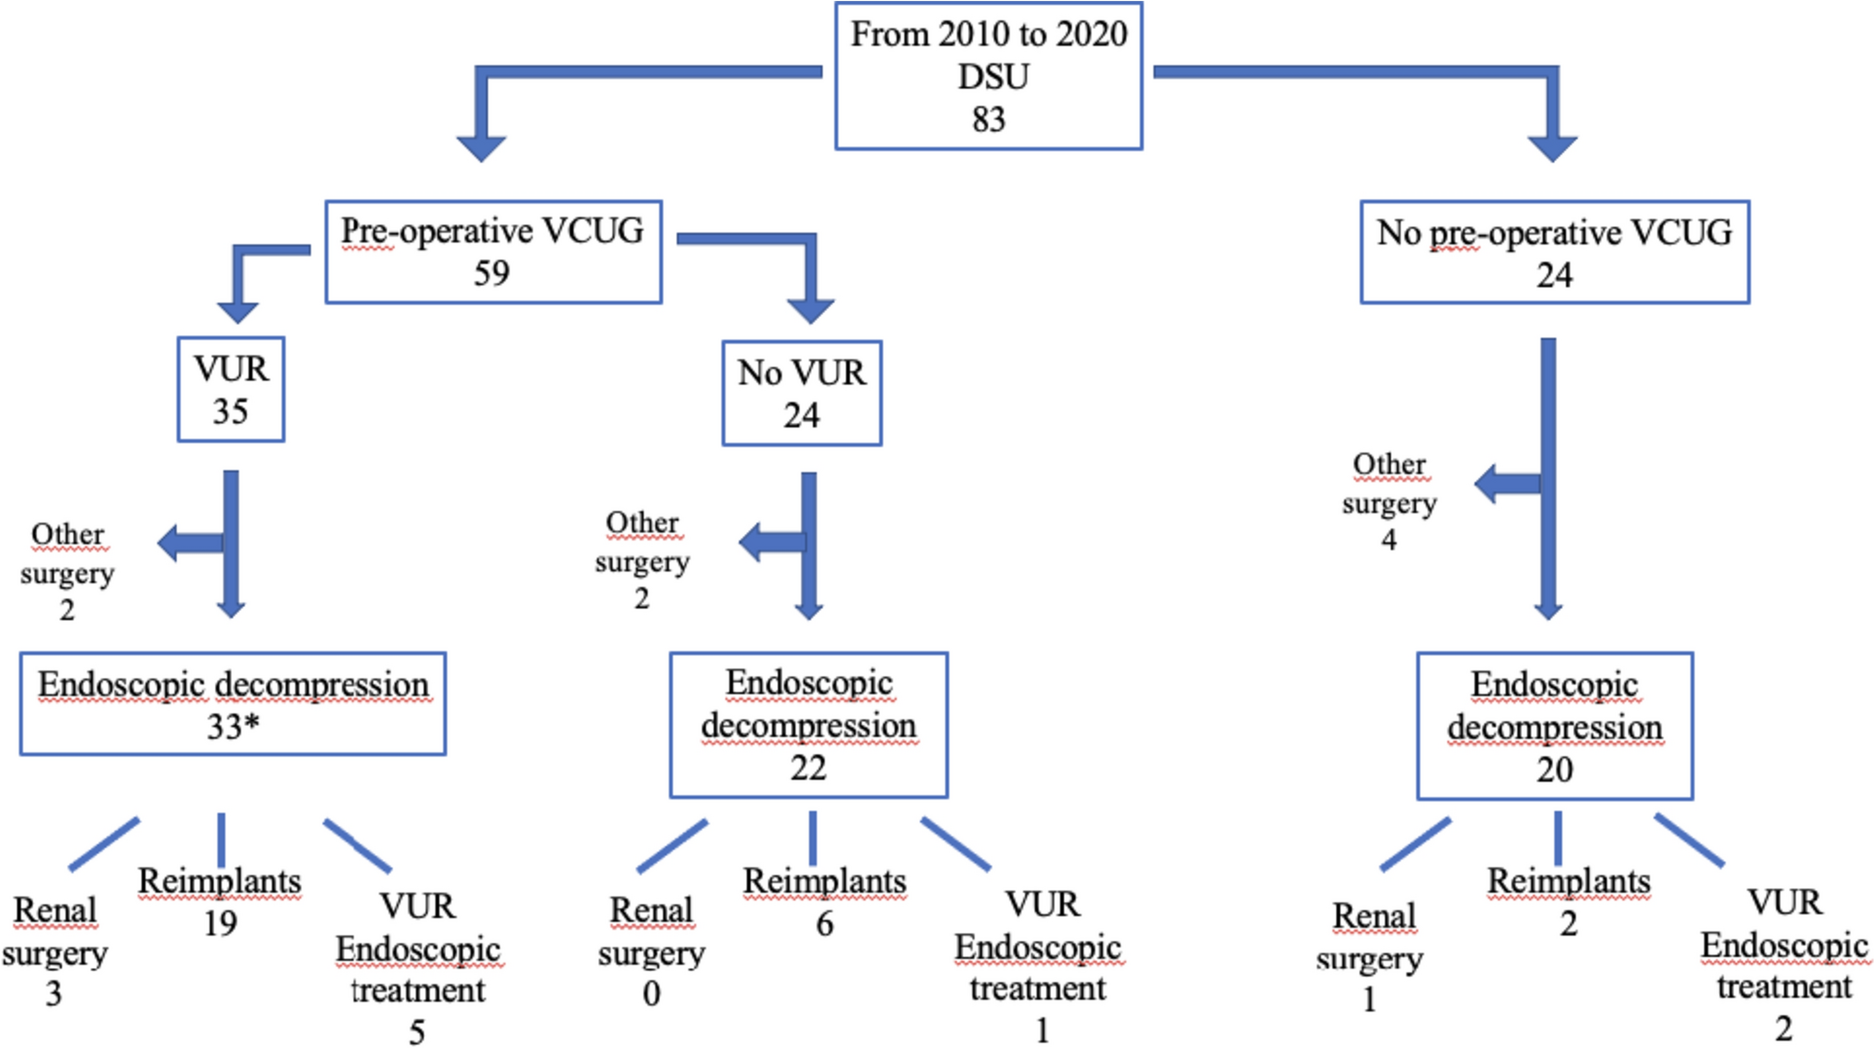 Voiding cystourethrography in patients undergoing endoscopic decompression of duplex system ureteroceles: to do or not to do?